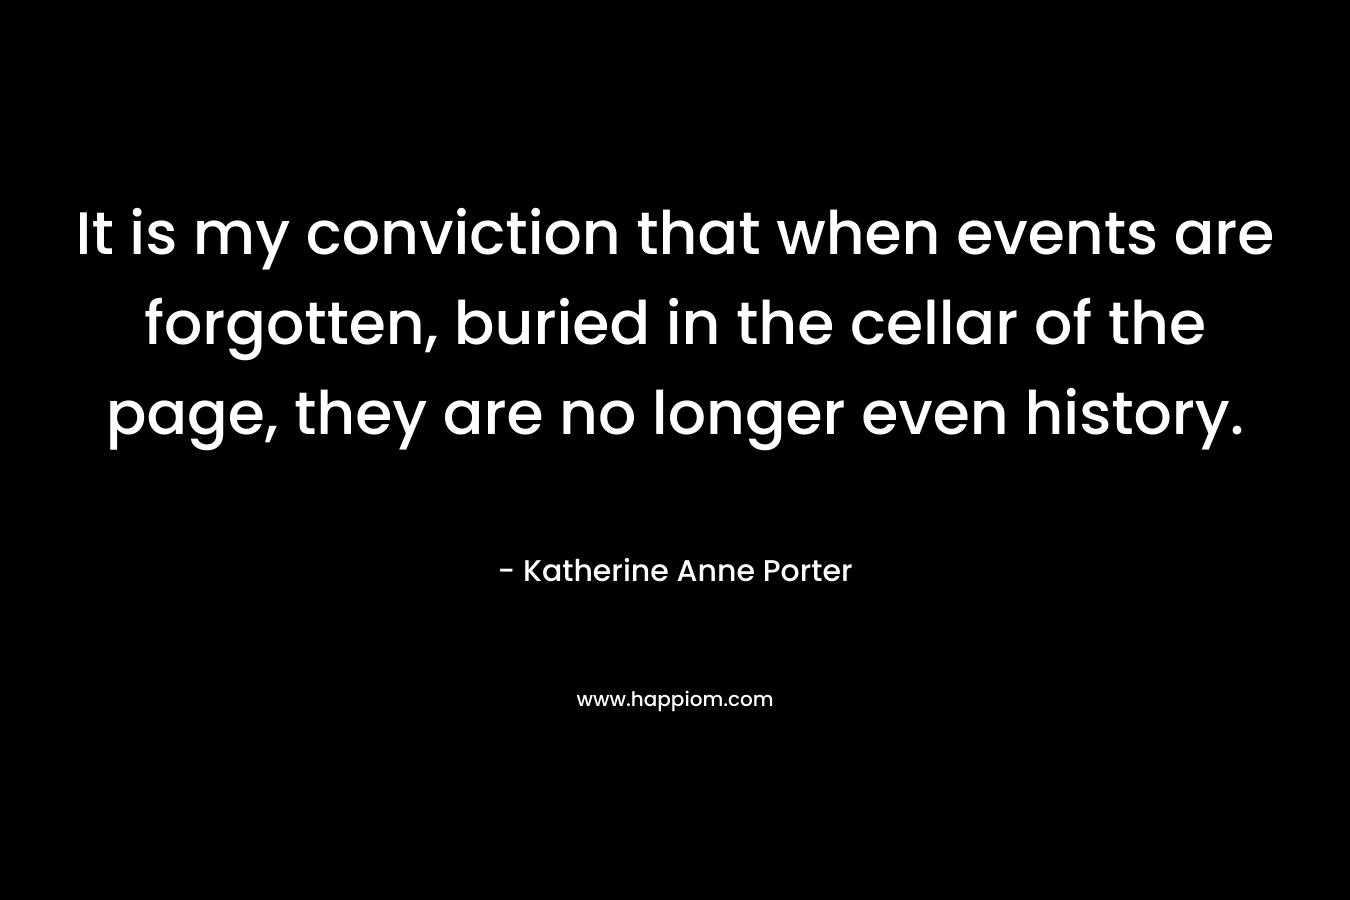 It is my conviction that when events are forgotten, buried in the cellar of the page, they are no longer even history.